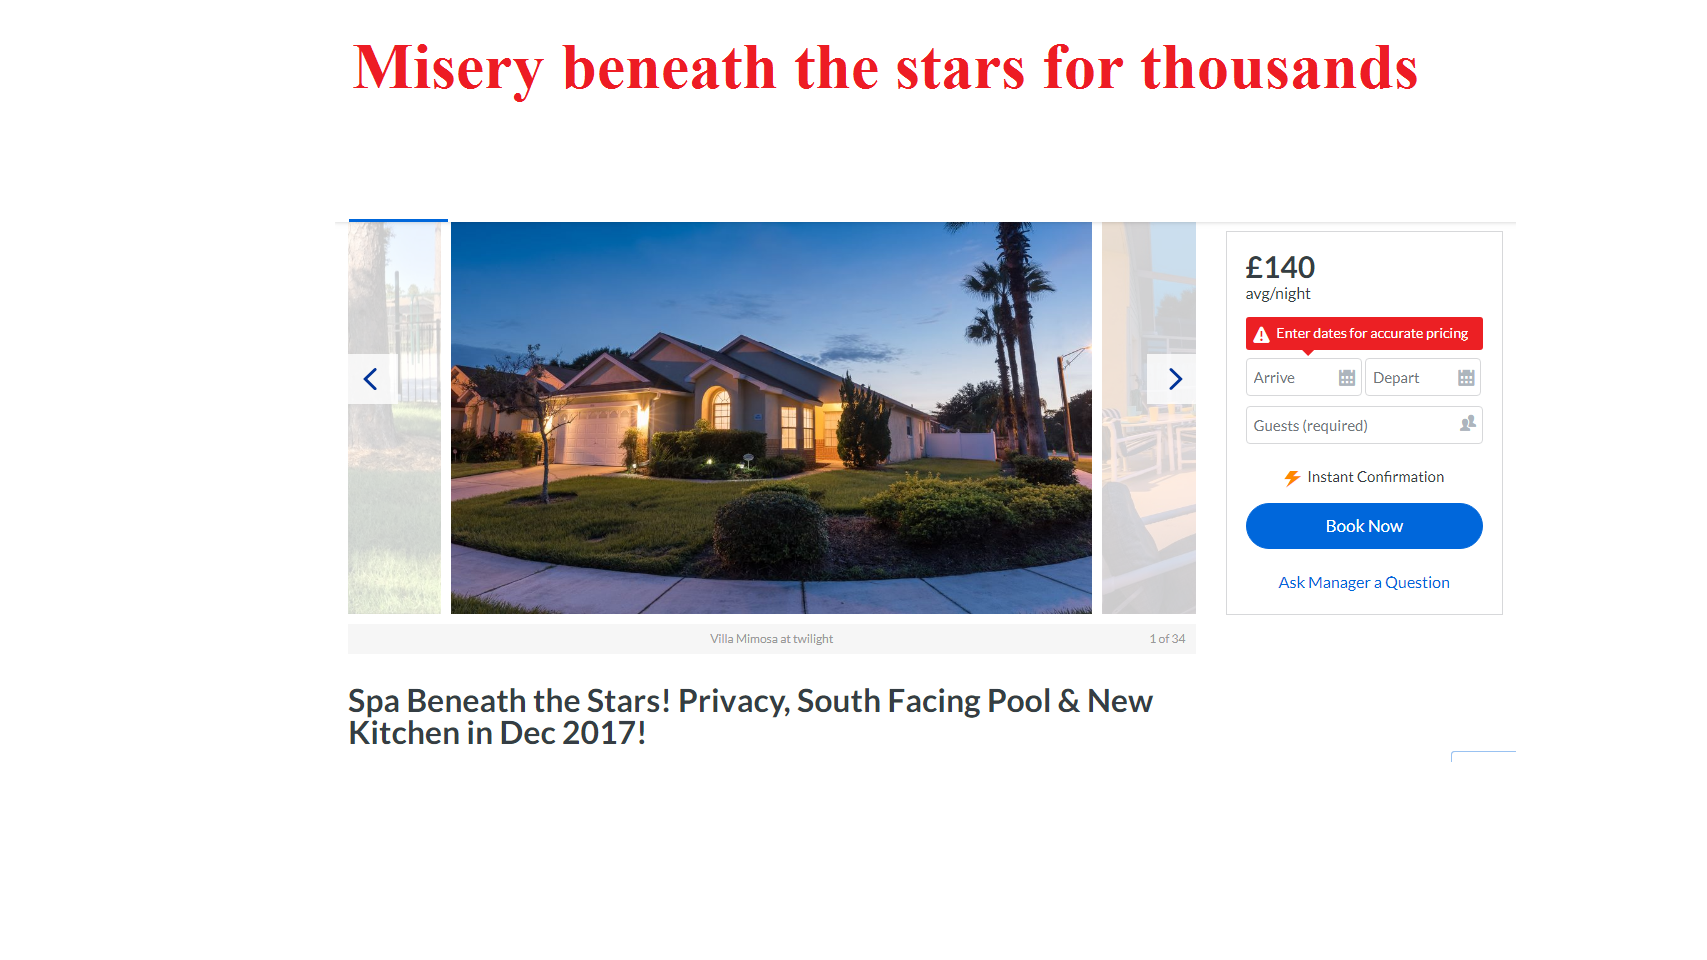 Pension Life Blog - Mastermind - Stephen Ward enjoys a spa beneath the stars whilst thousands of victims see their pensions in the hands of dalriada trustees